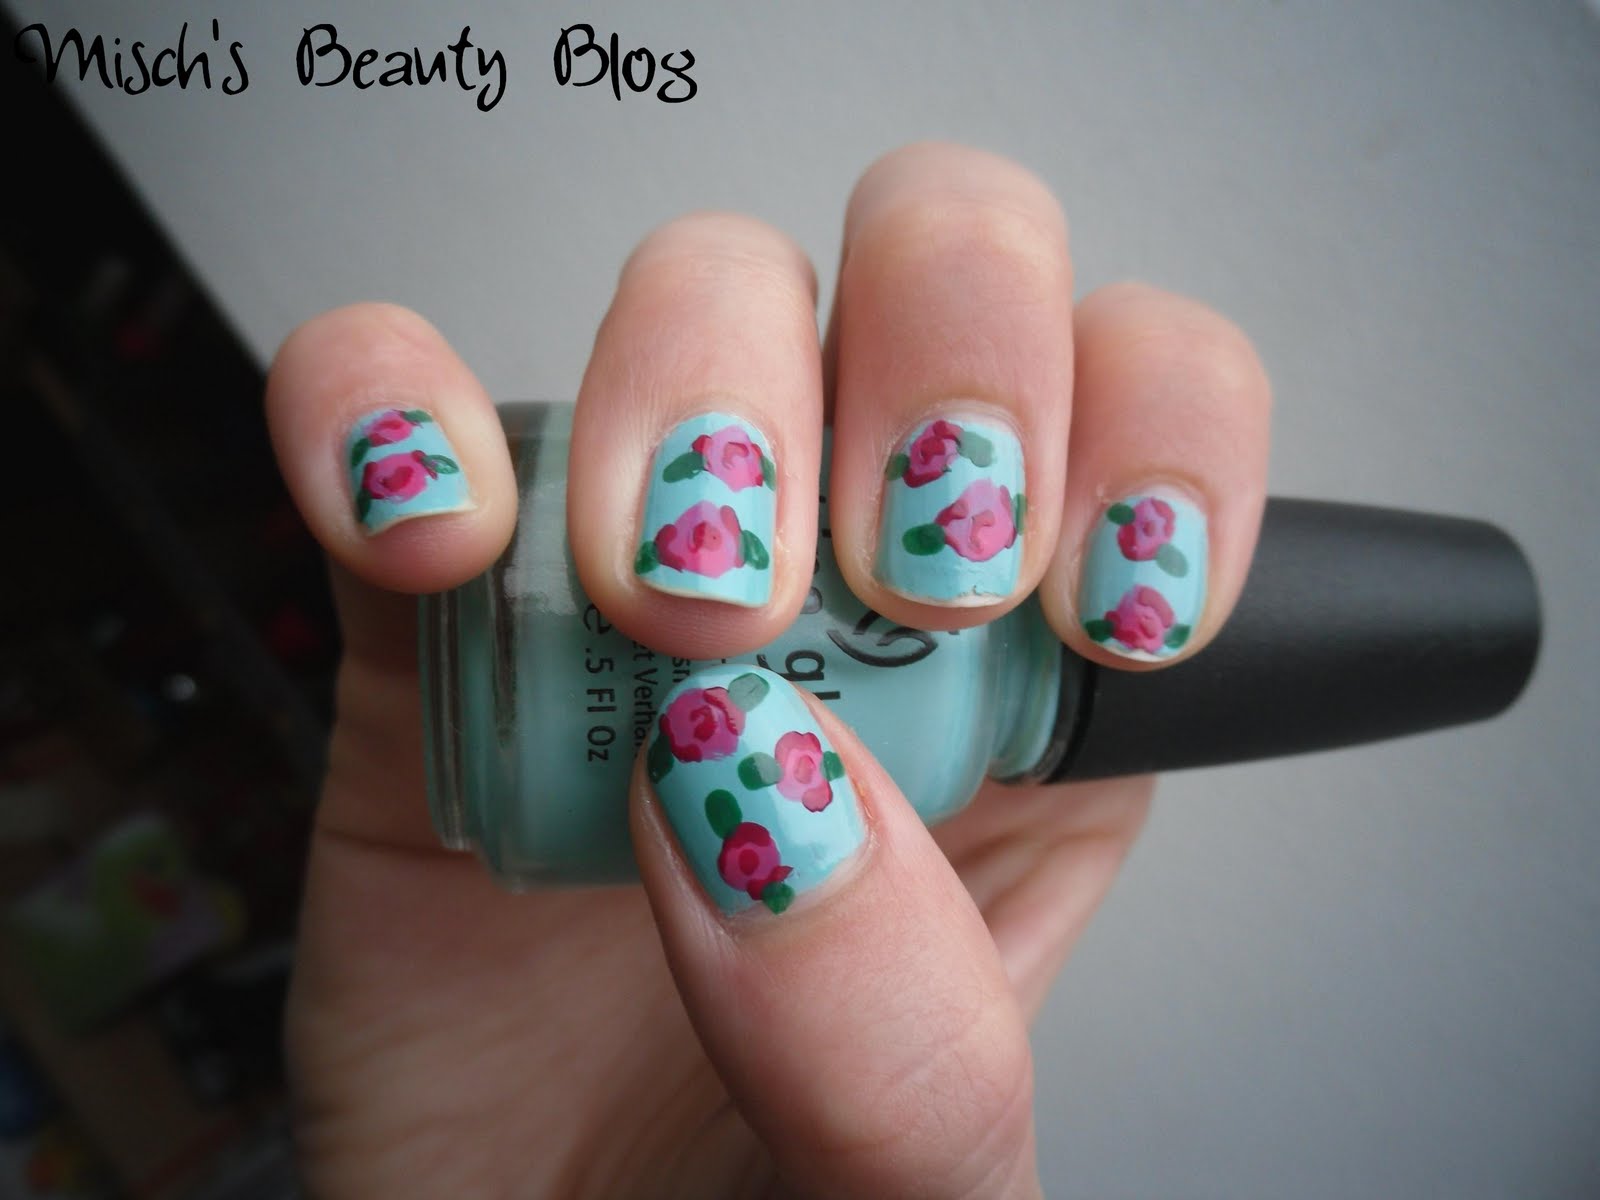 Misch's Beauty Blog: Picture Tutorial: Vintage Rose Nail Art